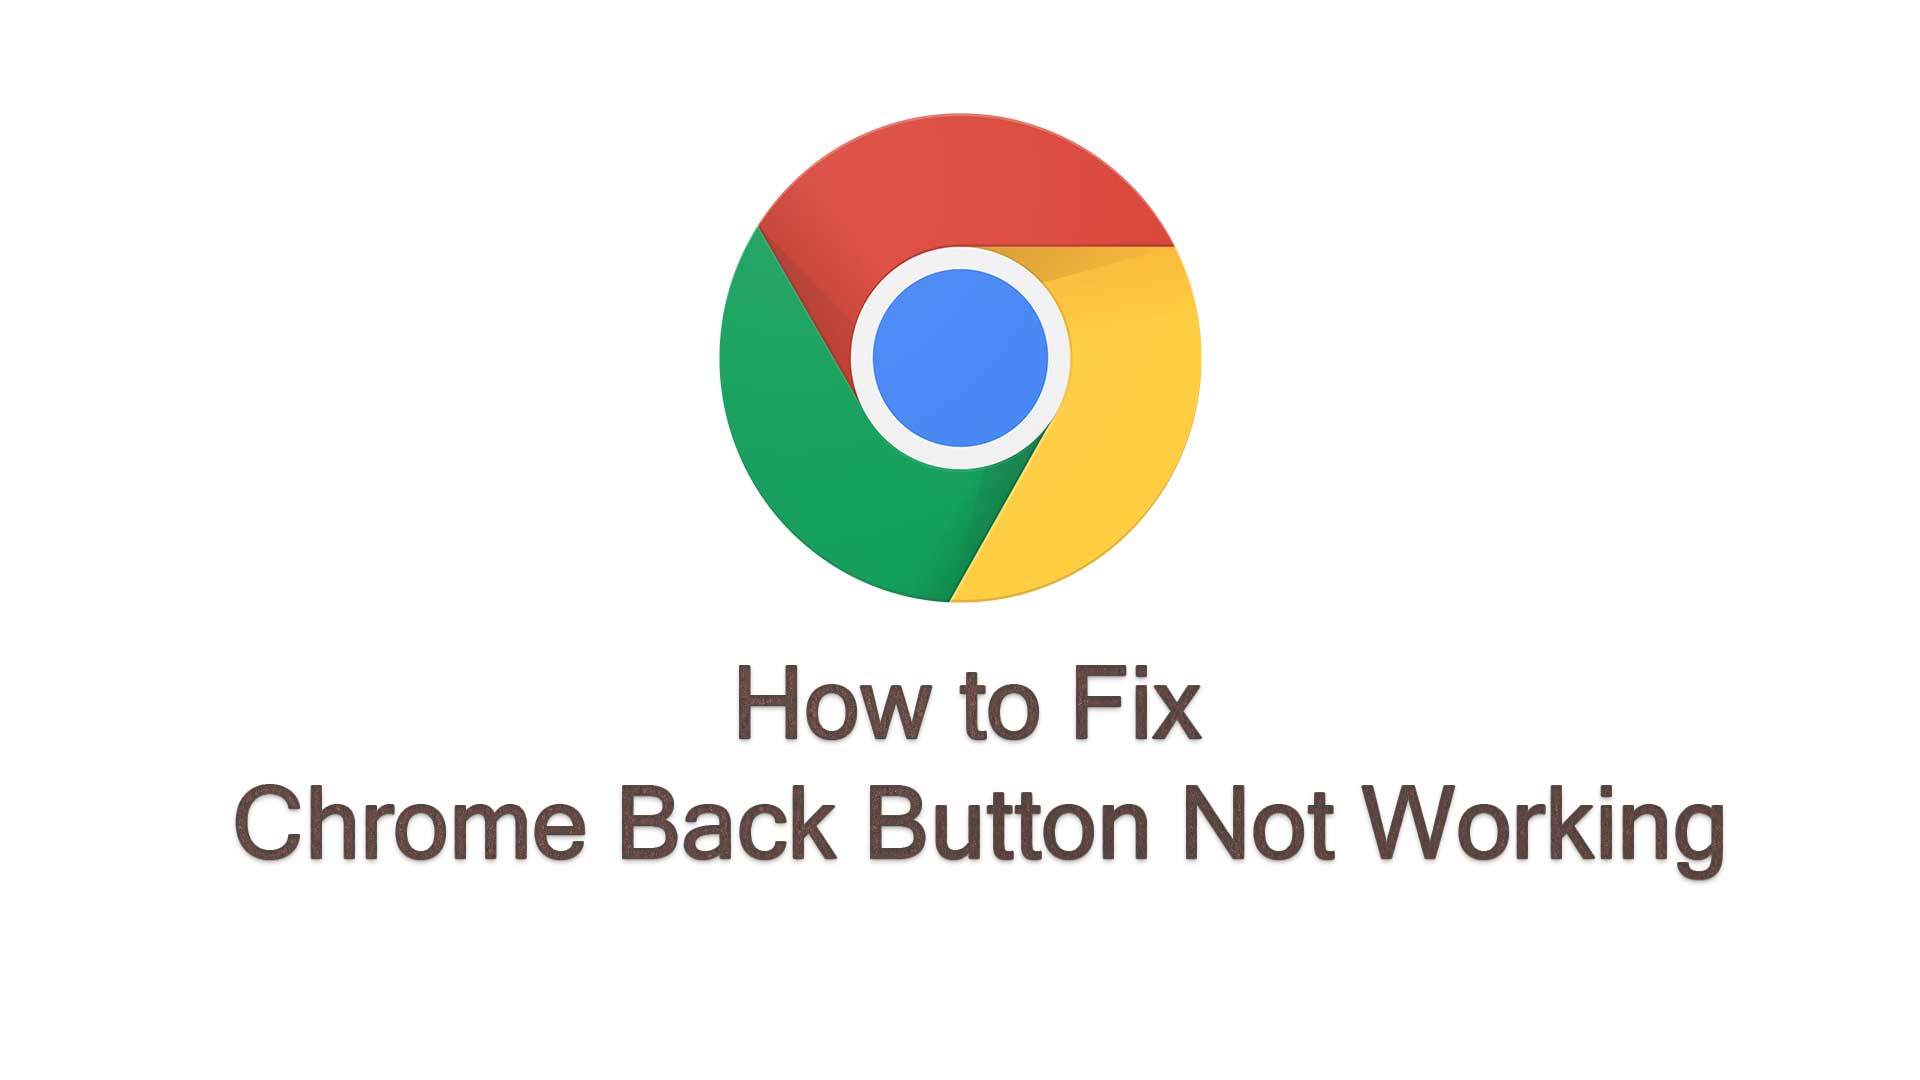 How to Fix Chrome Back Button Not Working